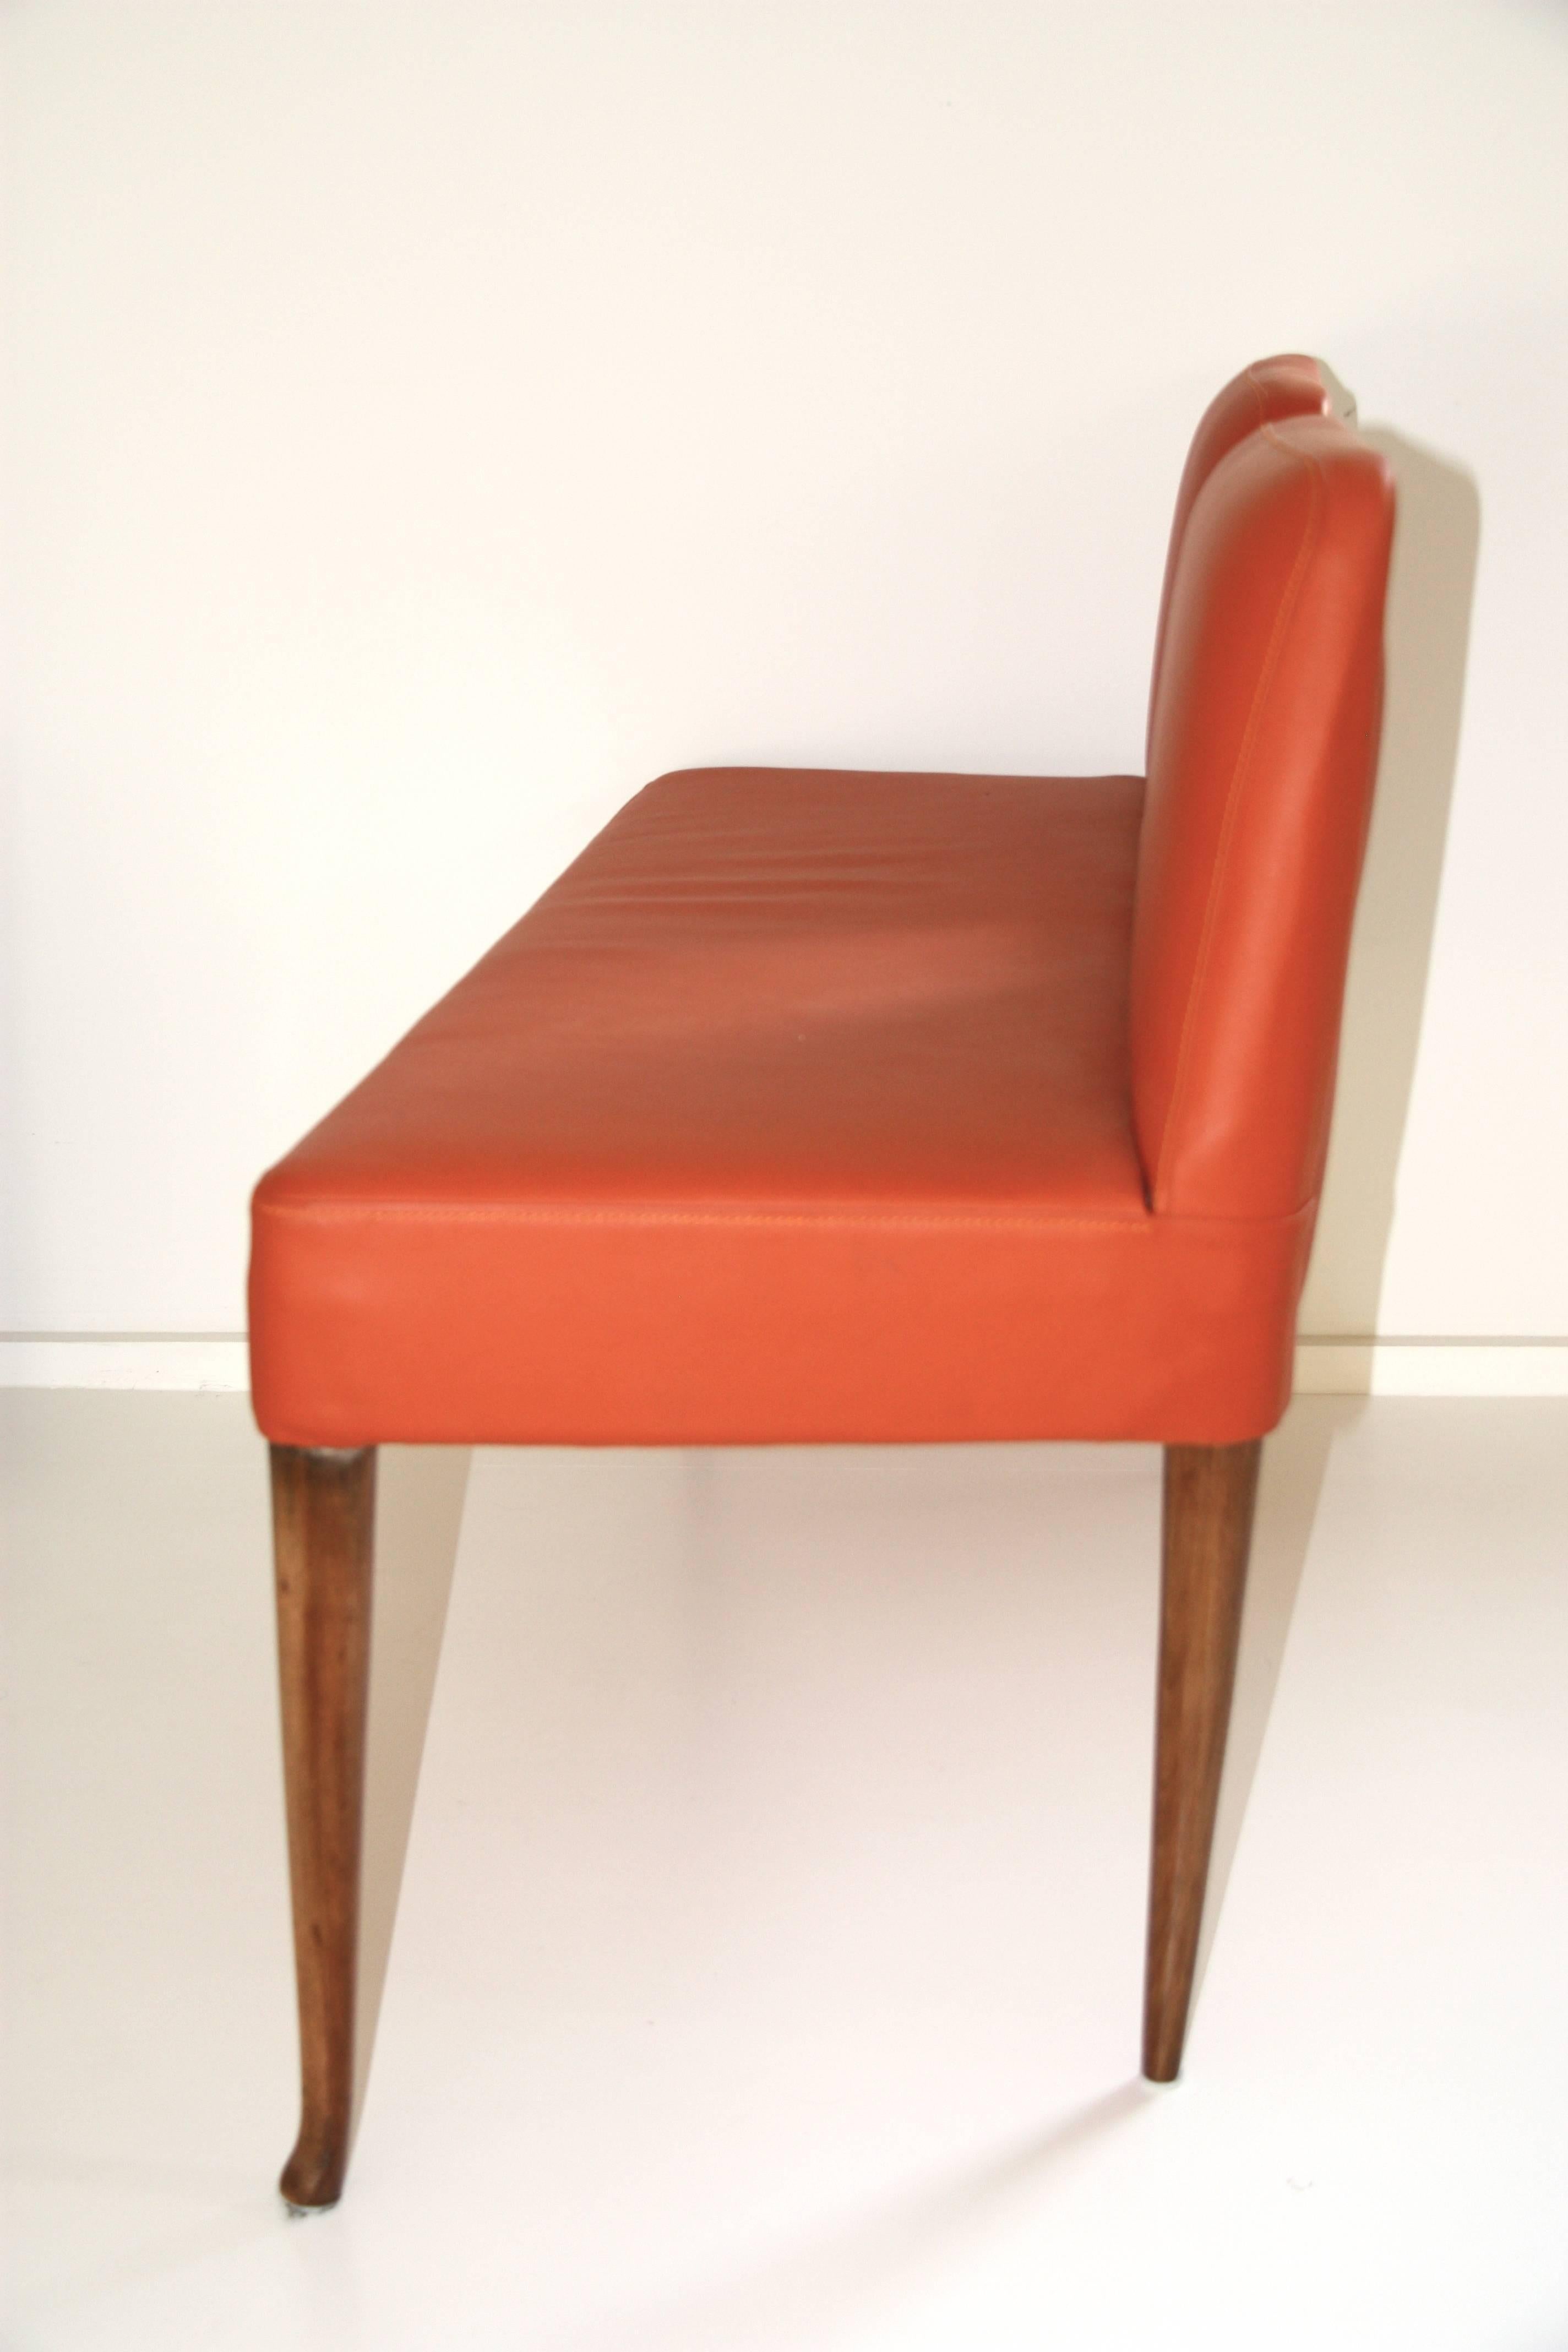 Vintage Italian Orange Leather Bench with Low Back, circa 1960 For Sale 1